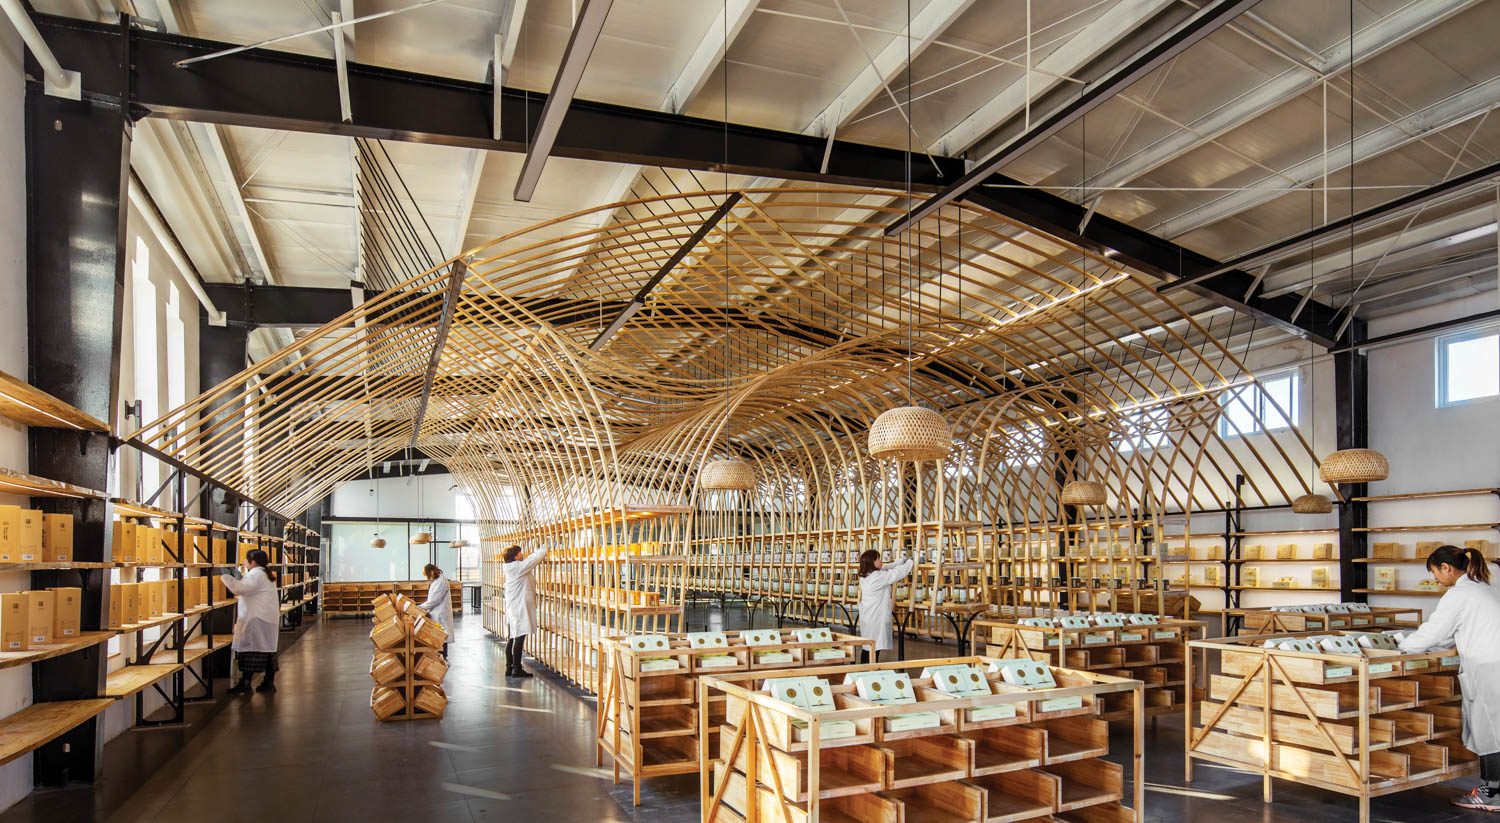 The 17-foot-tall canopy system nearly fills the 6,500-square-foot industrial building, its handmade quality nodding to how each piece of ice chrysan­the­mum is manually picked, dried, and baked by villagers (much of this industry disrupted in the last two years by COVID-19 and flooding); the 12 local vari­eties displayed here are for tour groups and distributors to browse before participating in livestream auctions. Like the canopy, the freestanding display units are also pine.